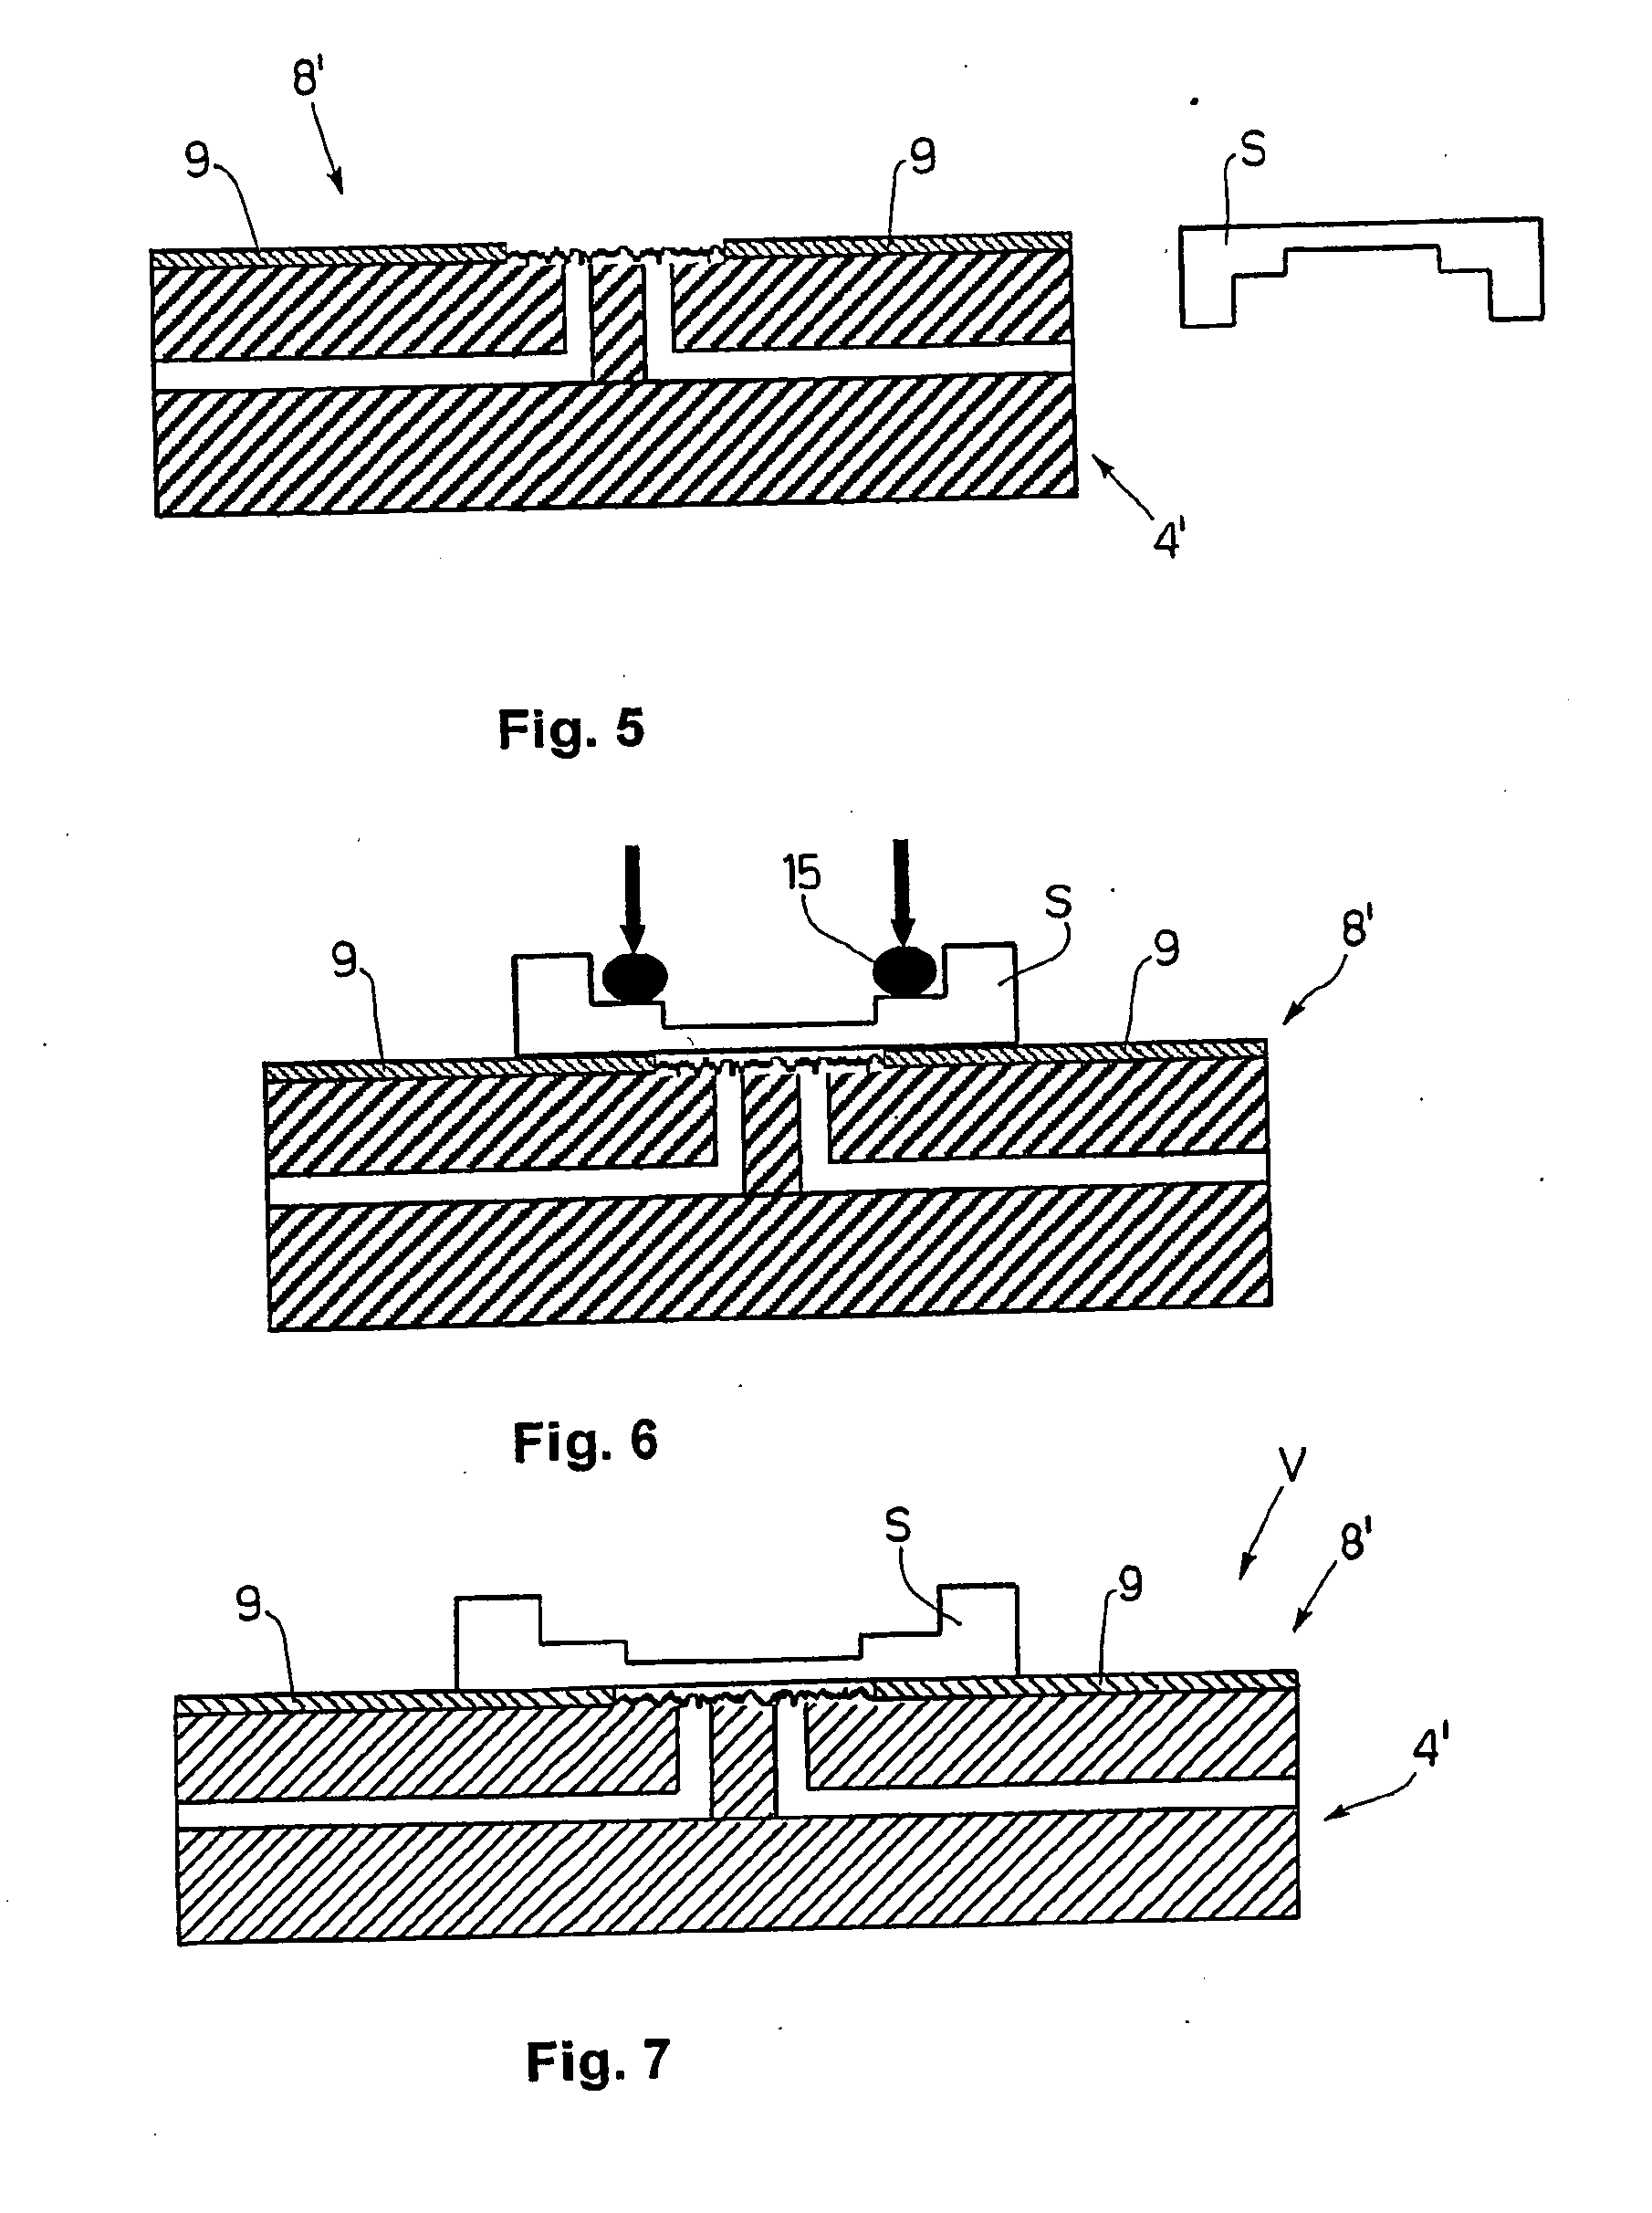 Method for Bonding a Layer of Silicone to a Substrate of Methacrylate Polymer